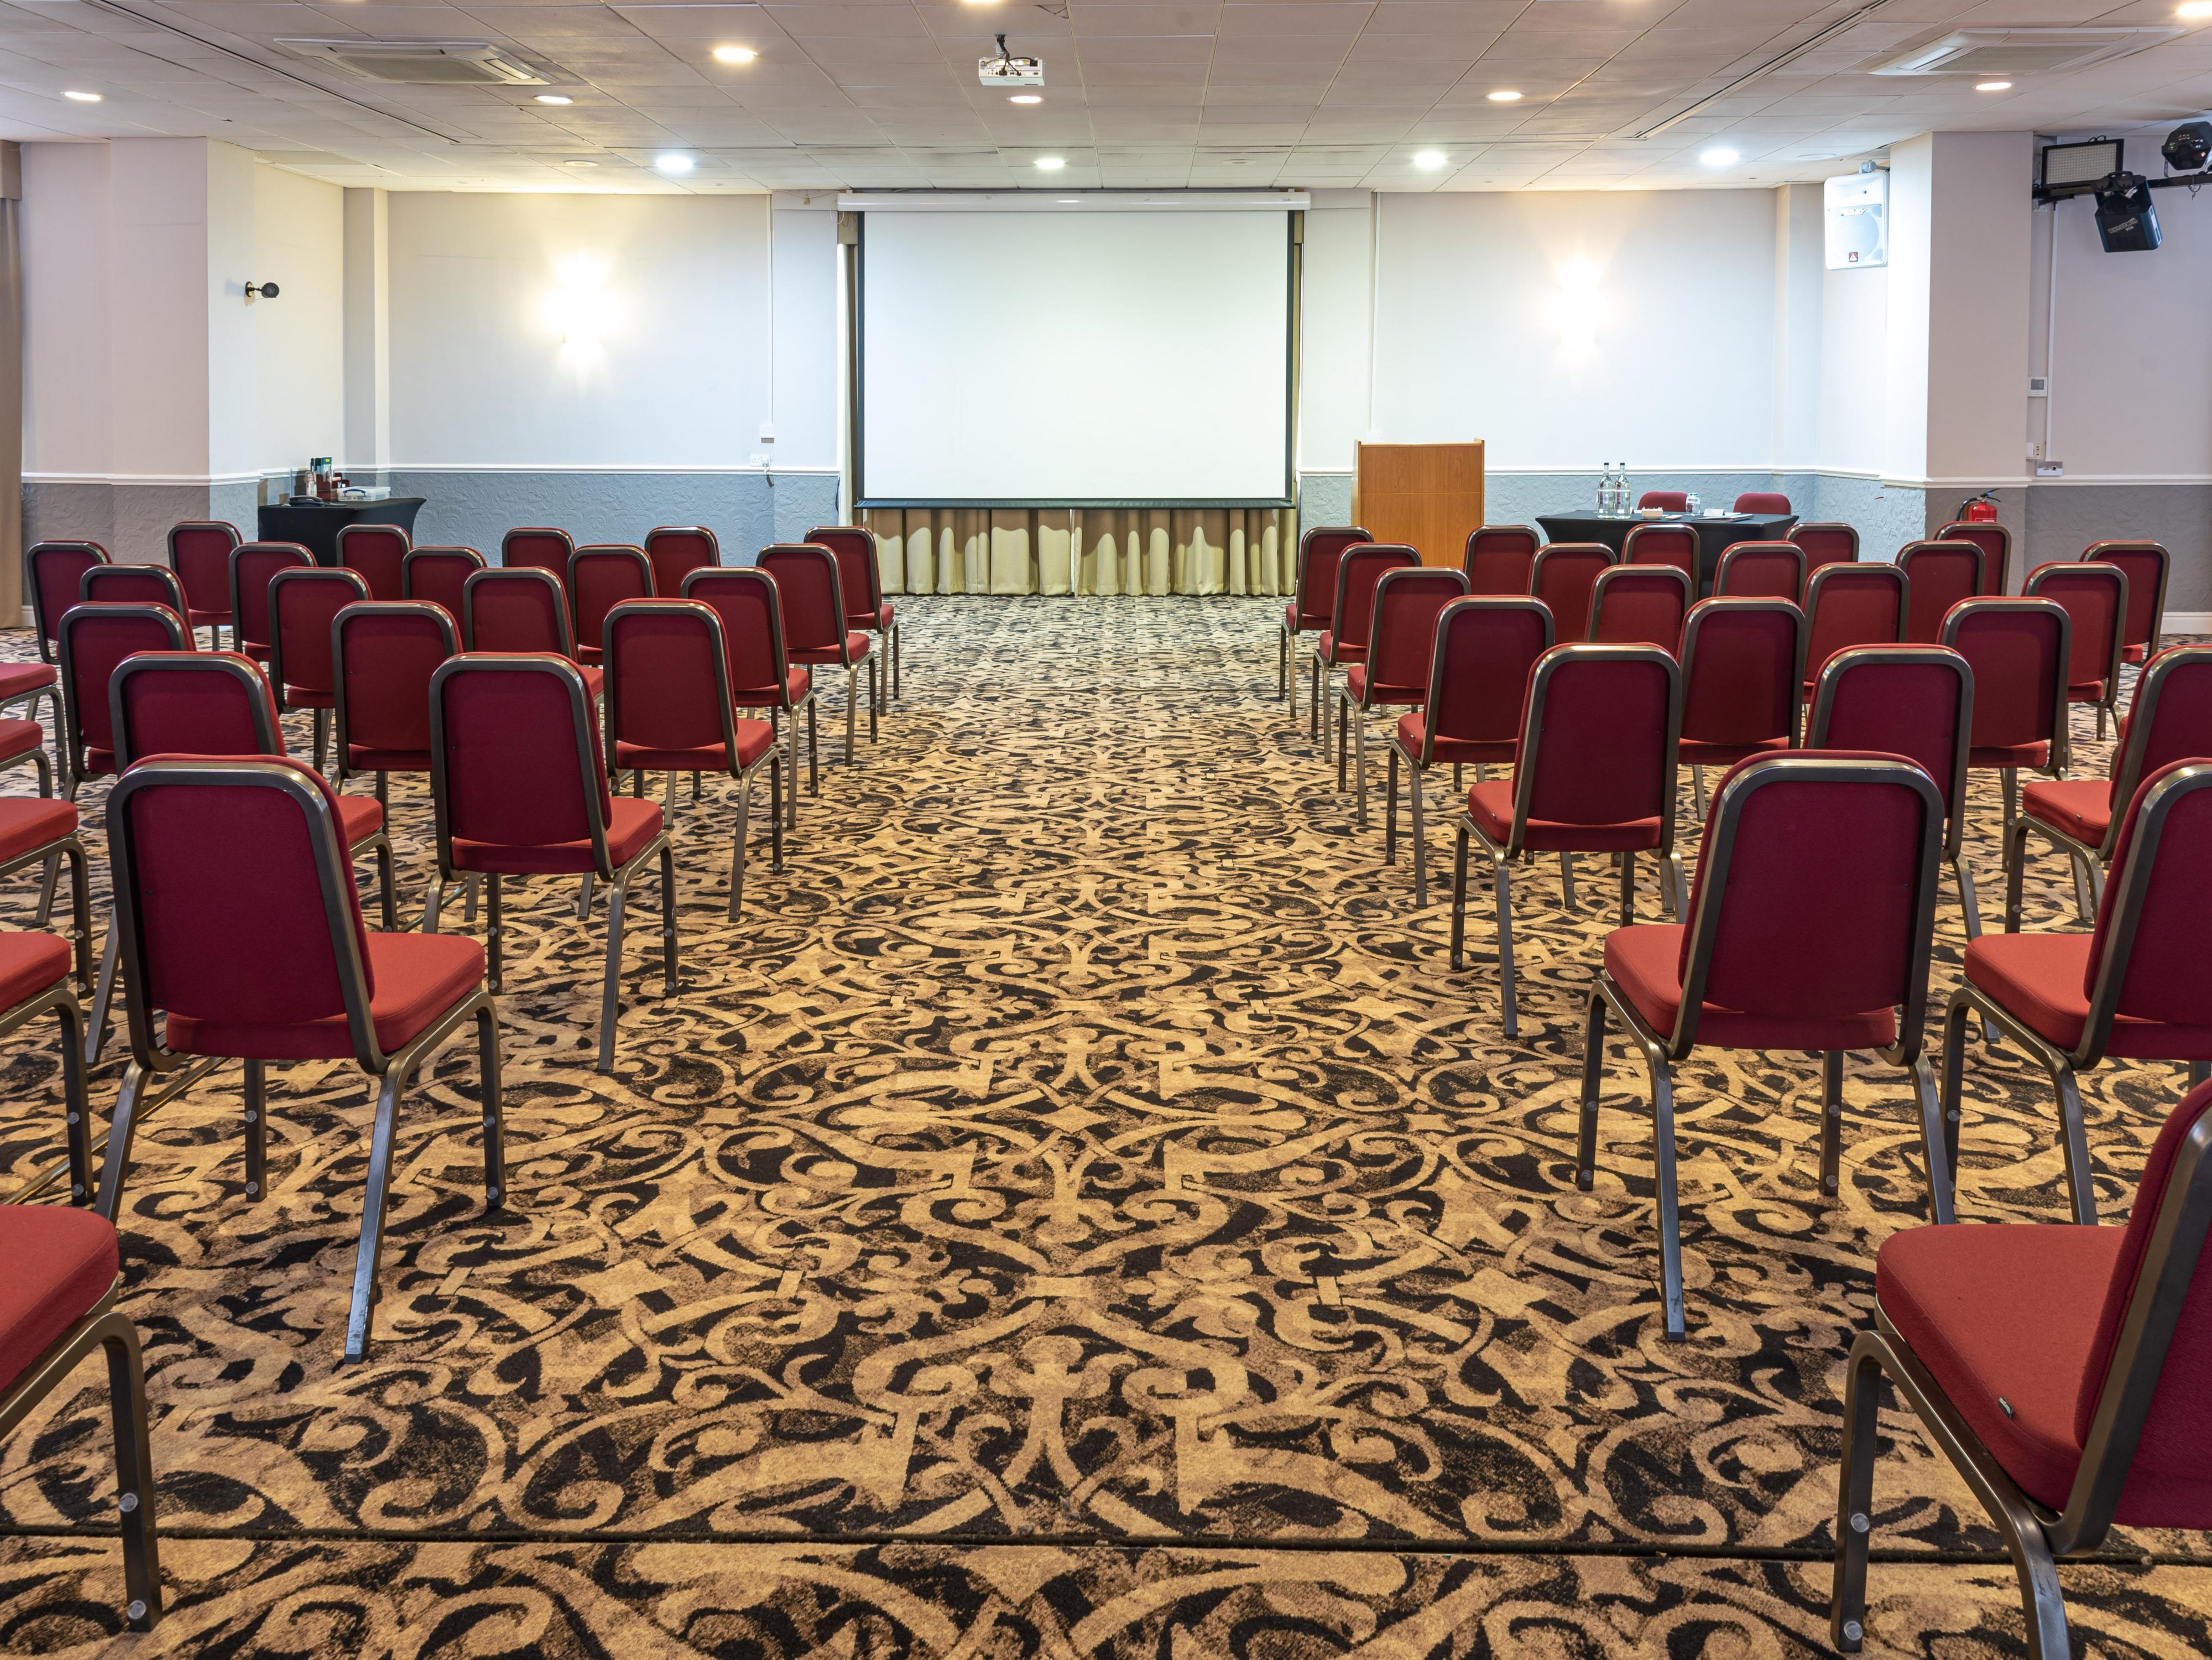 Looking for the perfect venue to host your next meeting? With us, you can build you ideal package and our experienced staff will ensure your meeting runs smoothly.